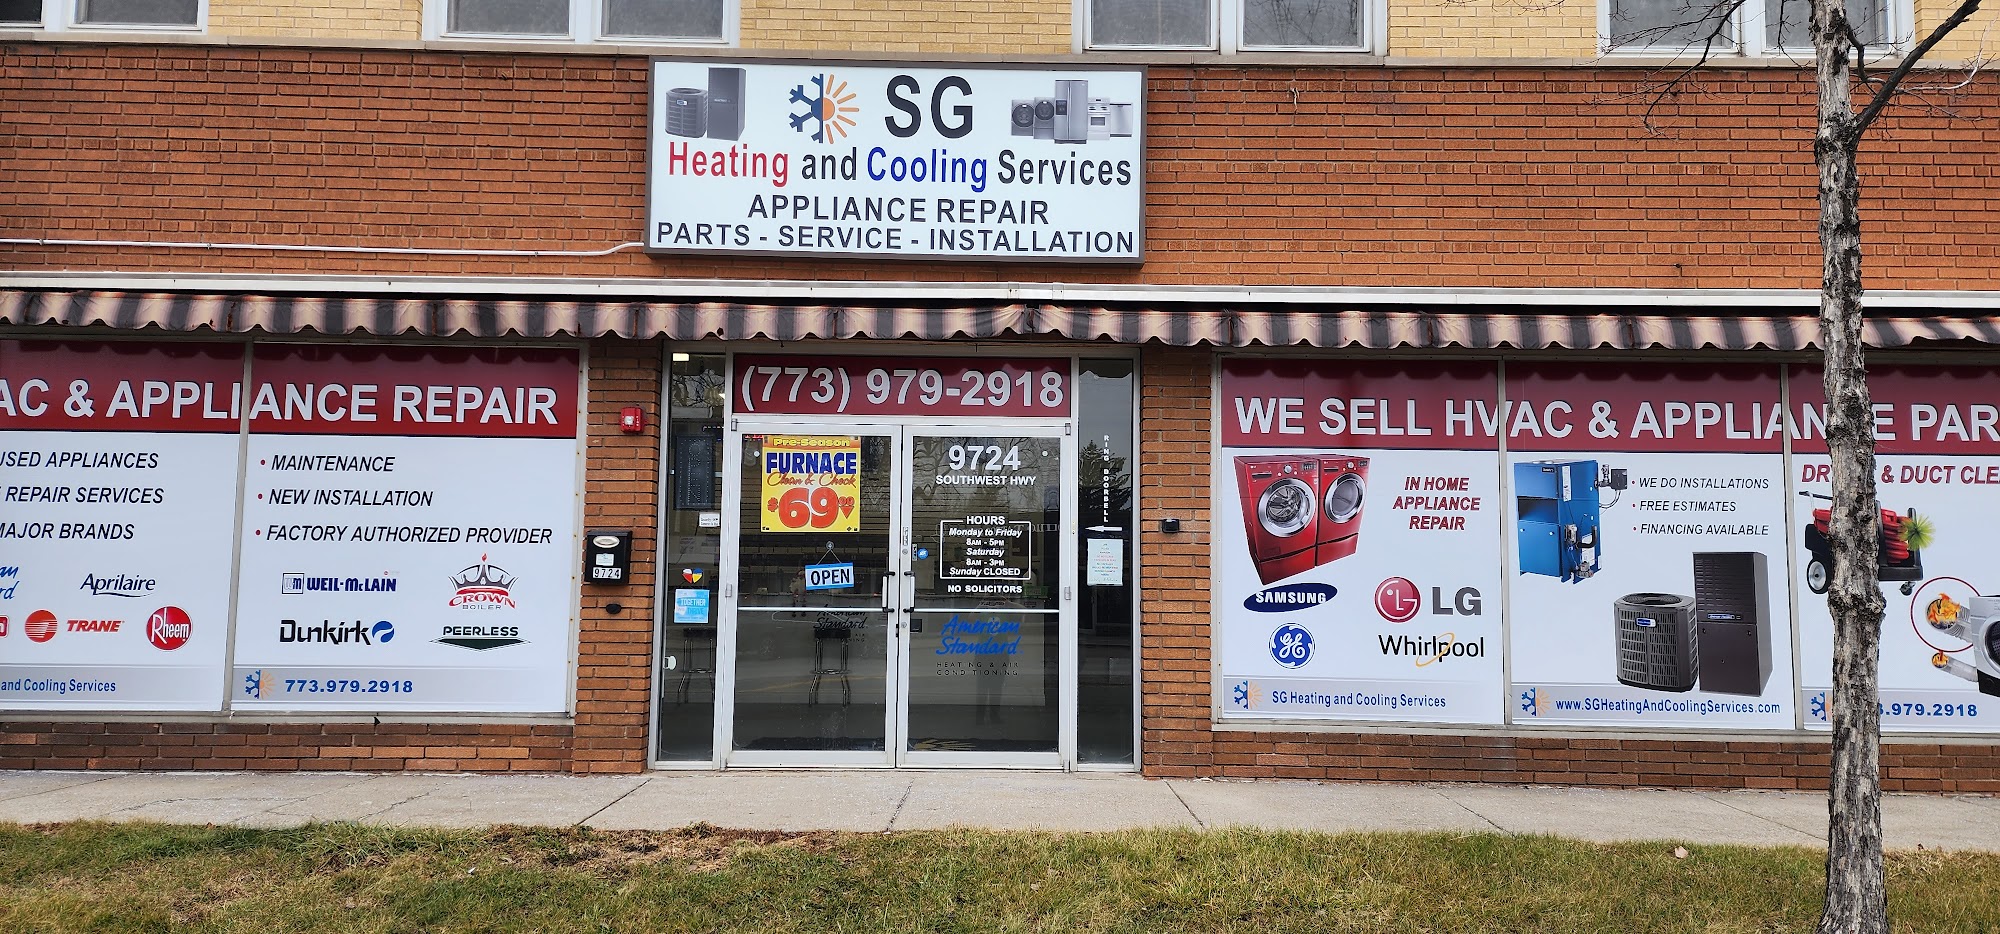 SG Heating & Cooling Services